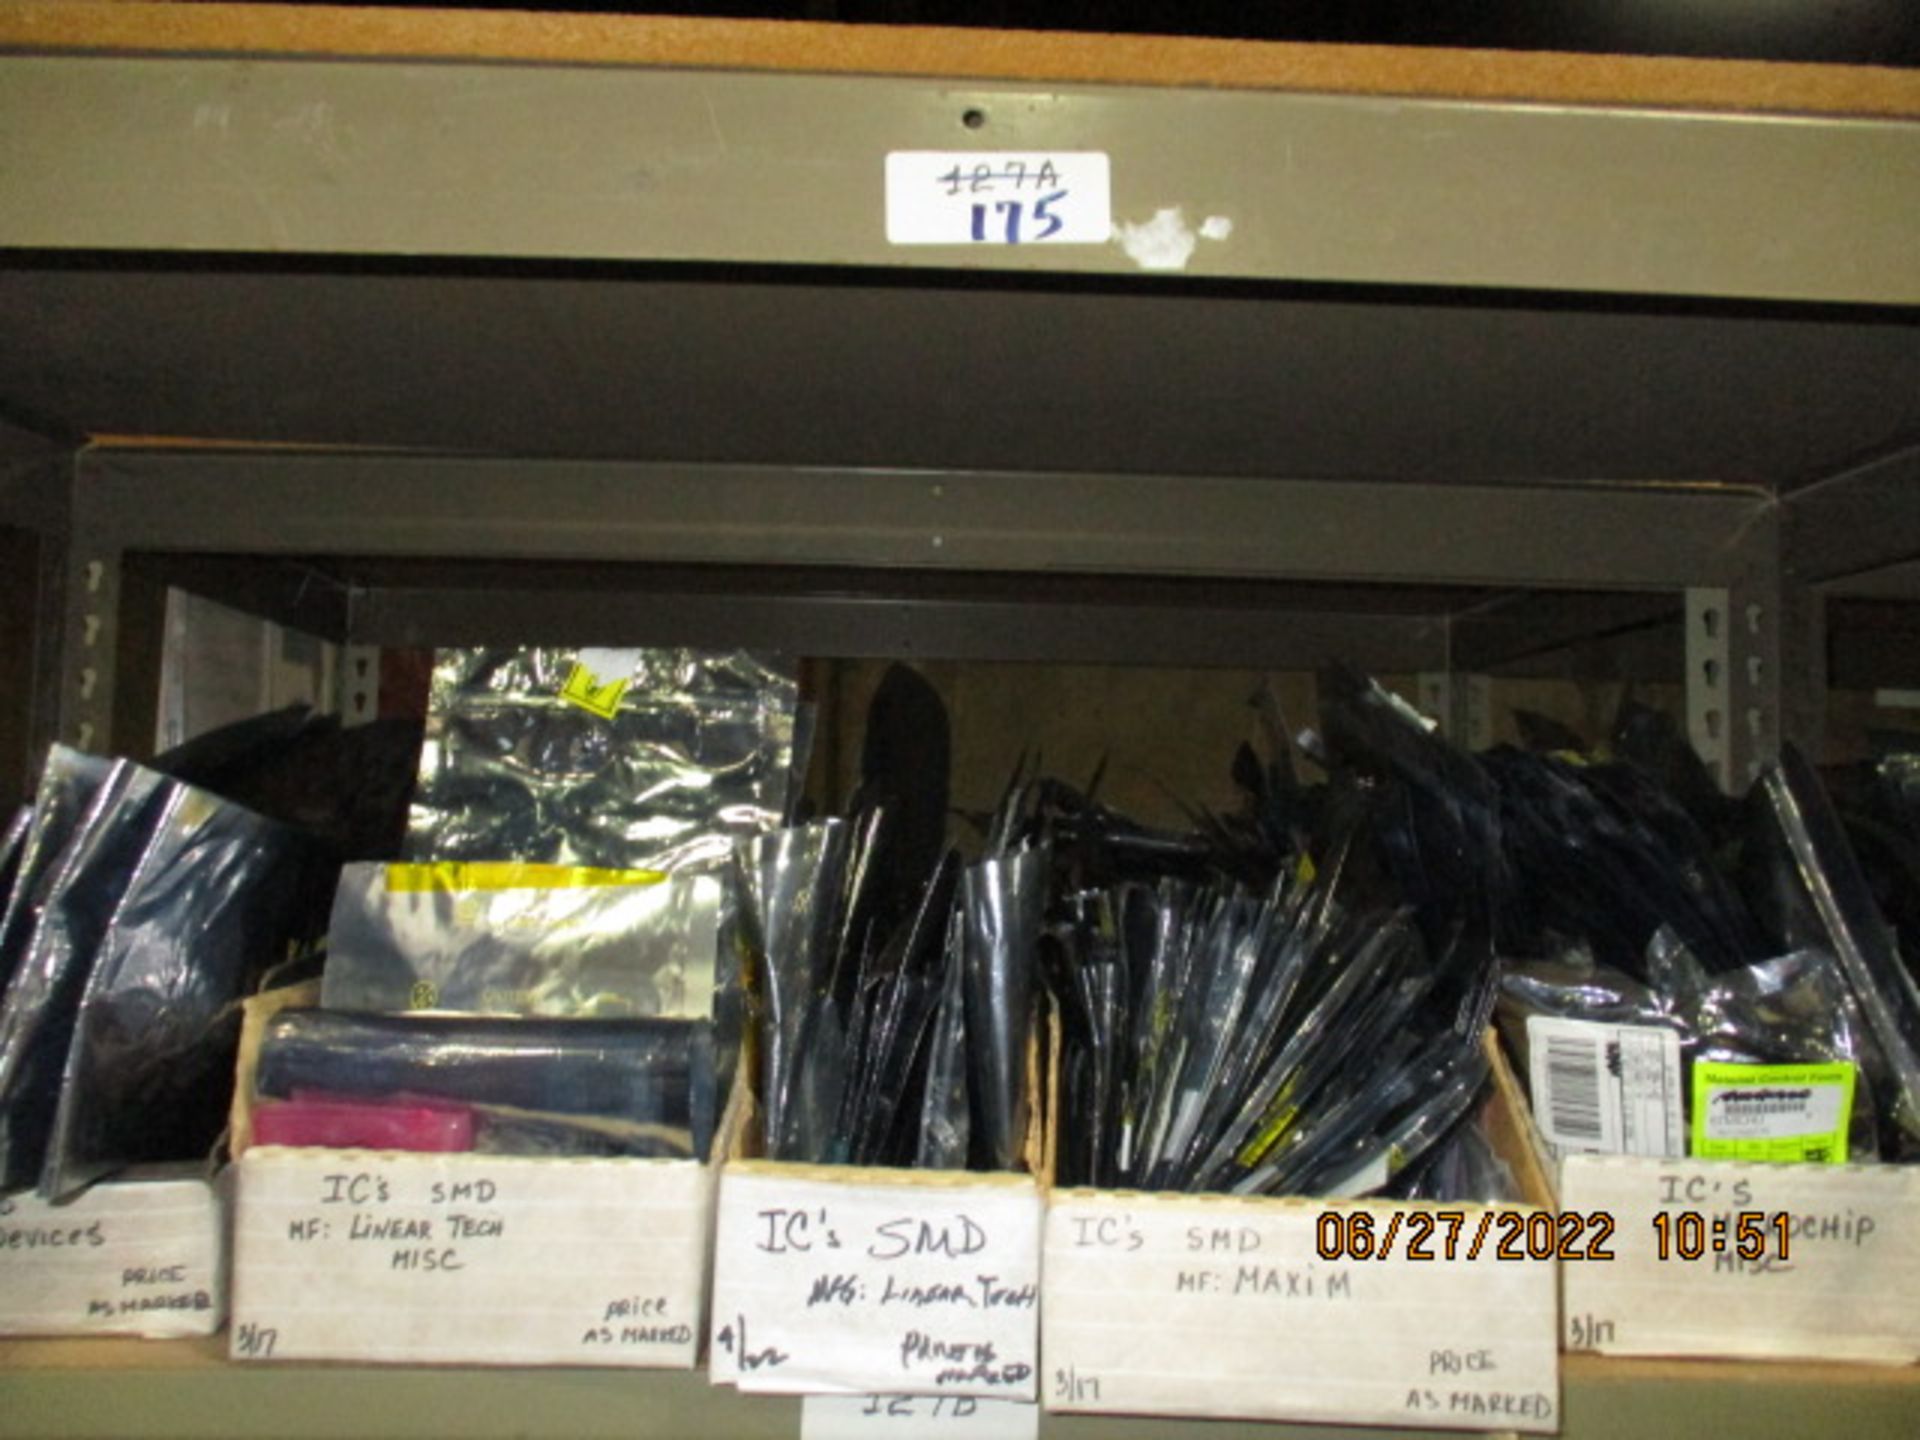 CONTENTS OF SHELVING UNIT CONSISTING OF IC'S SMD, IC'S MICROCHIP, IC'S CUT TAPES, SMD IC'S, IC - Image 2 of 6